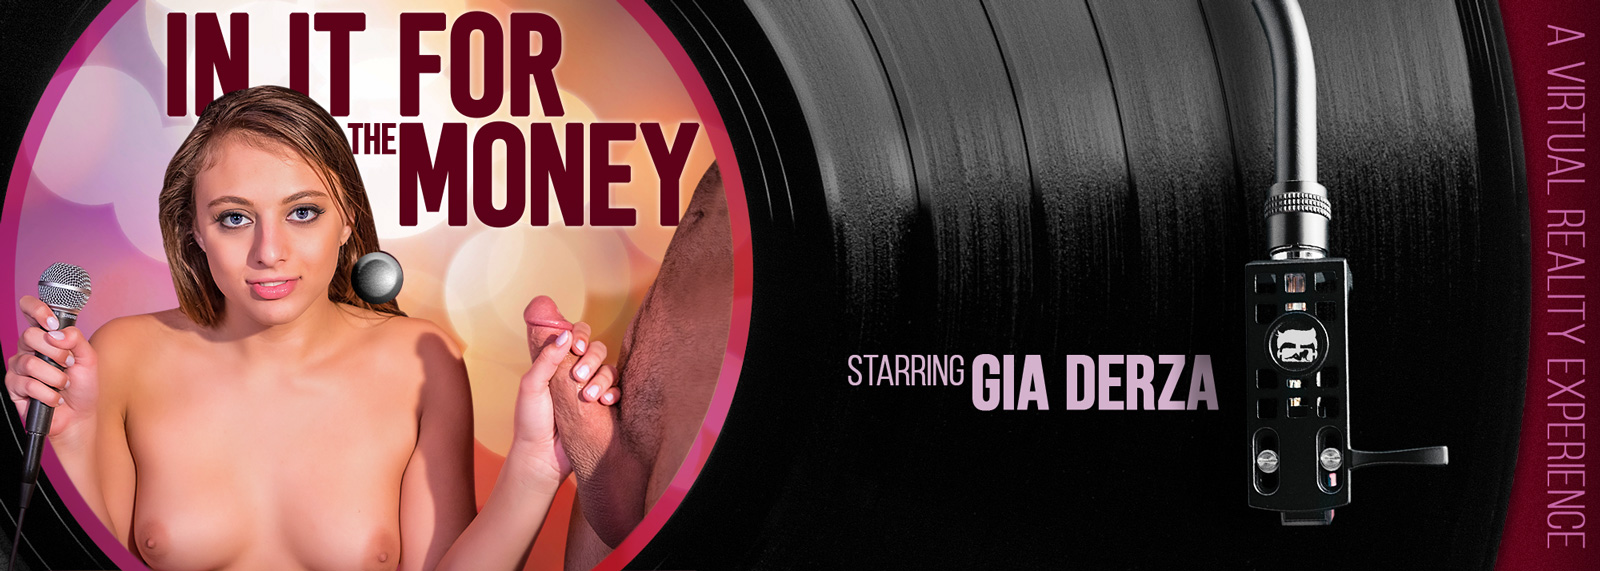 In It For The Money with Gia Derza  Slideshow